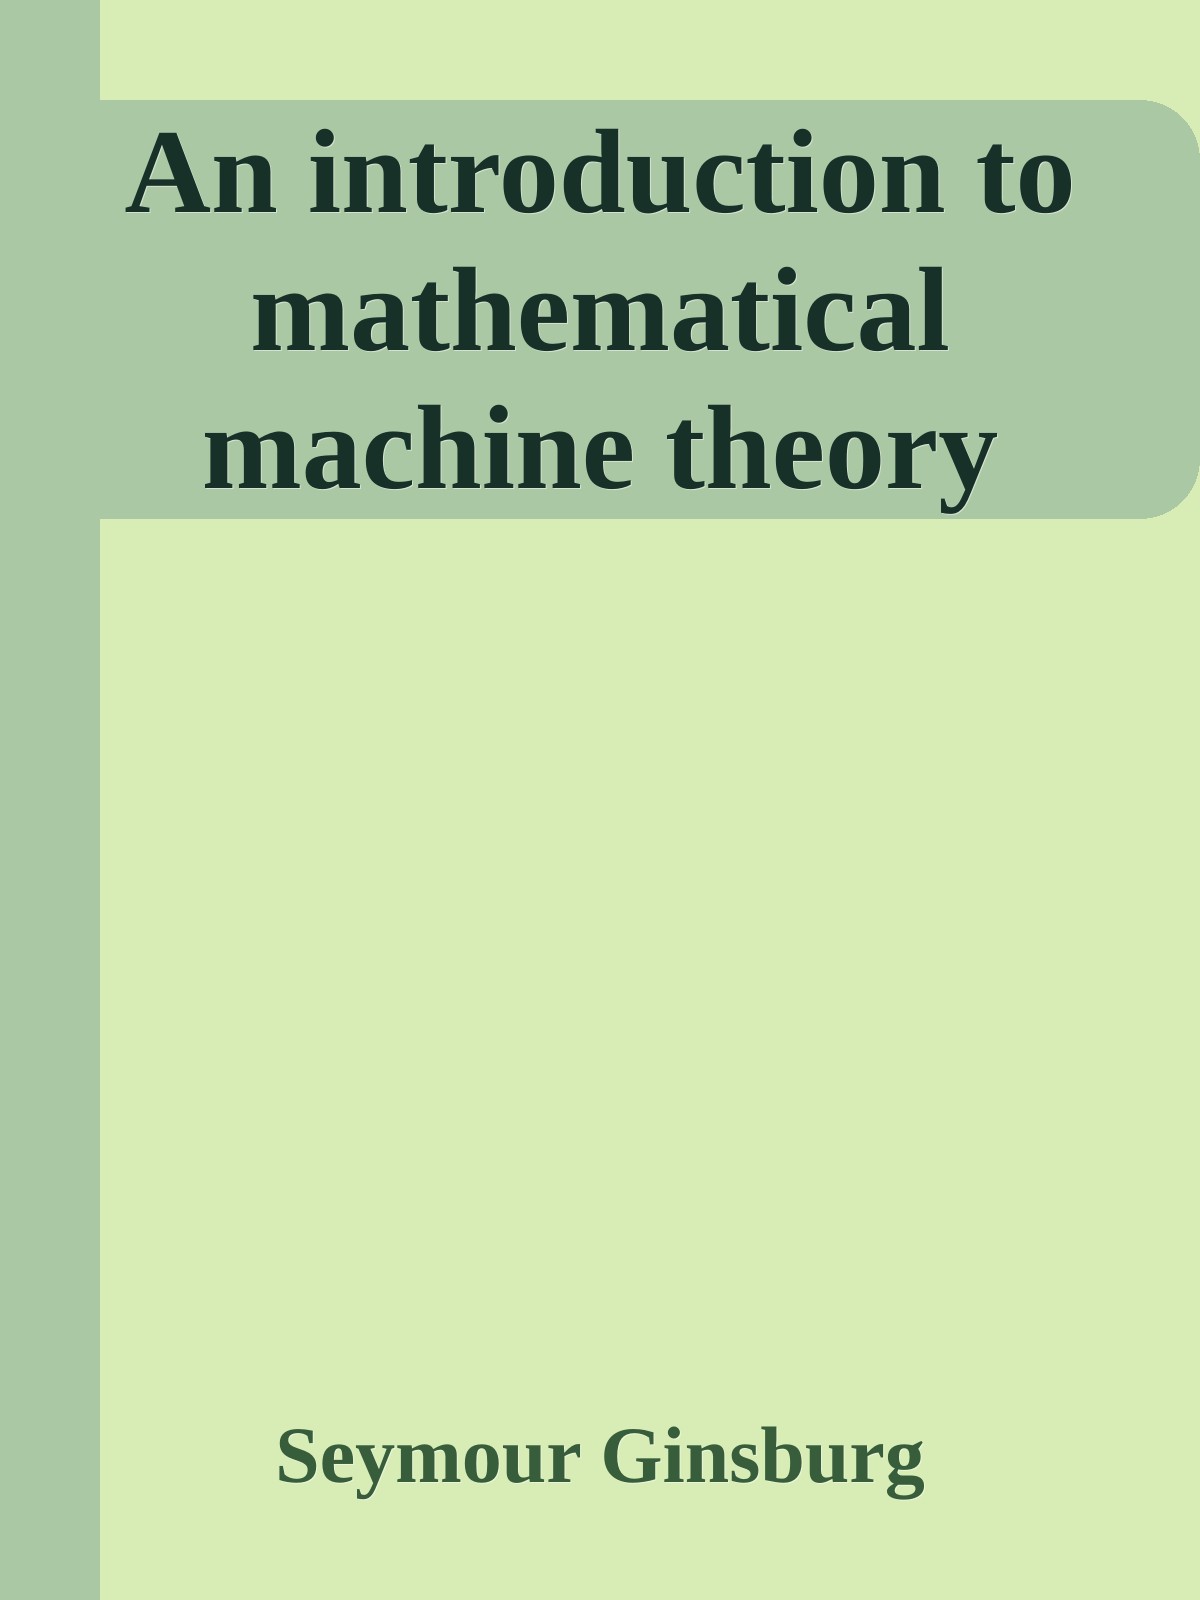 An introduction to mathematical machine theory